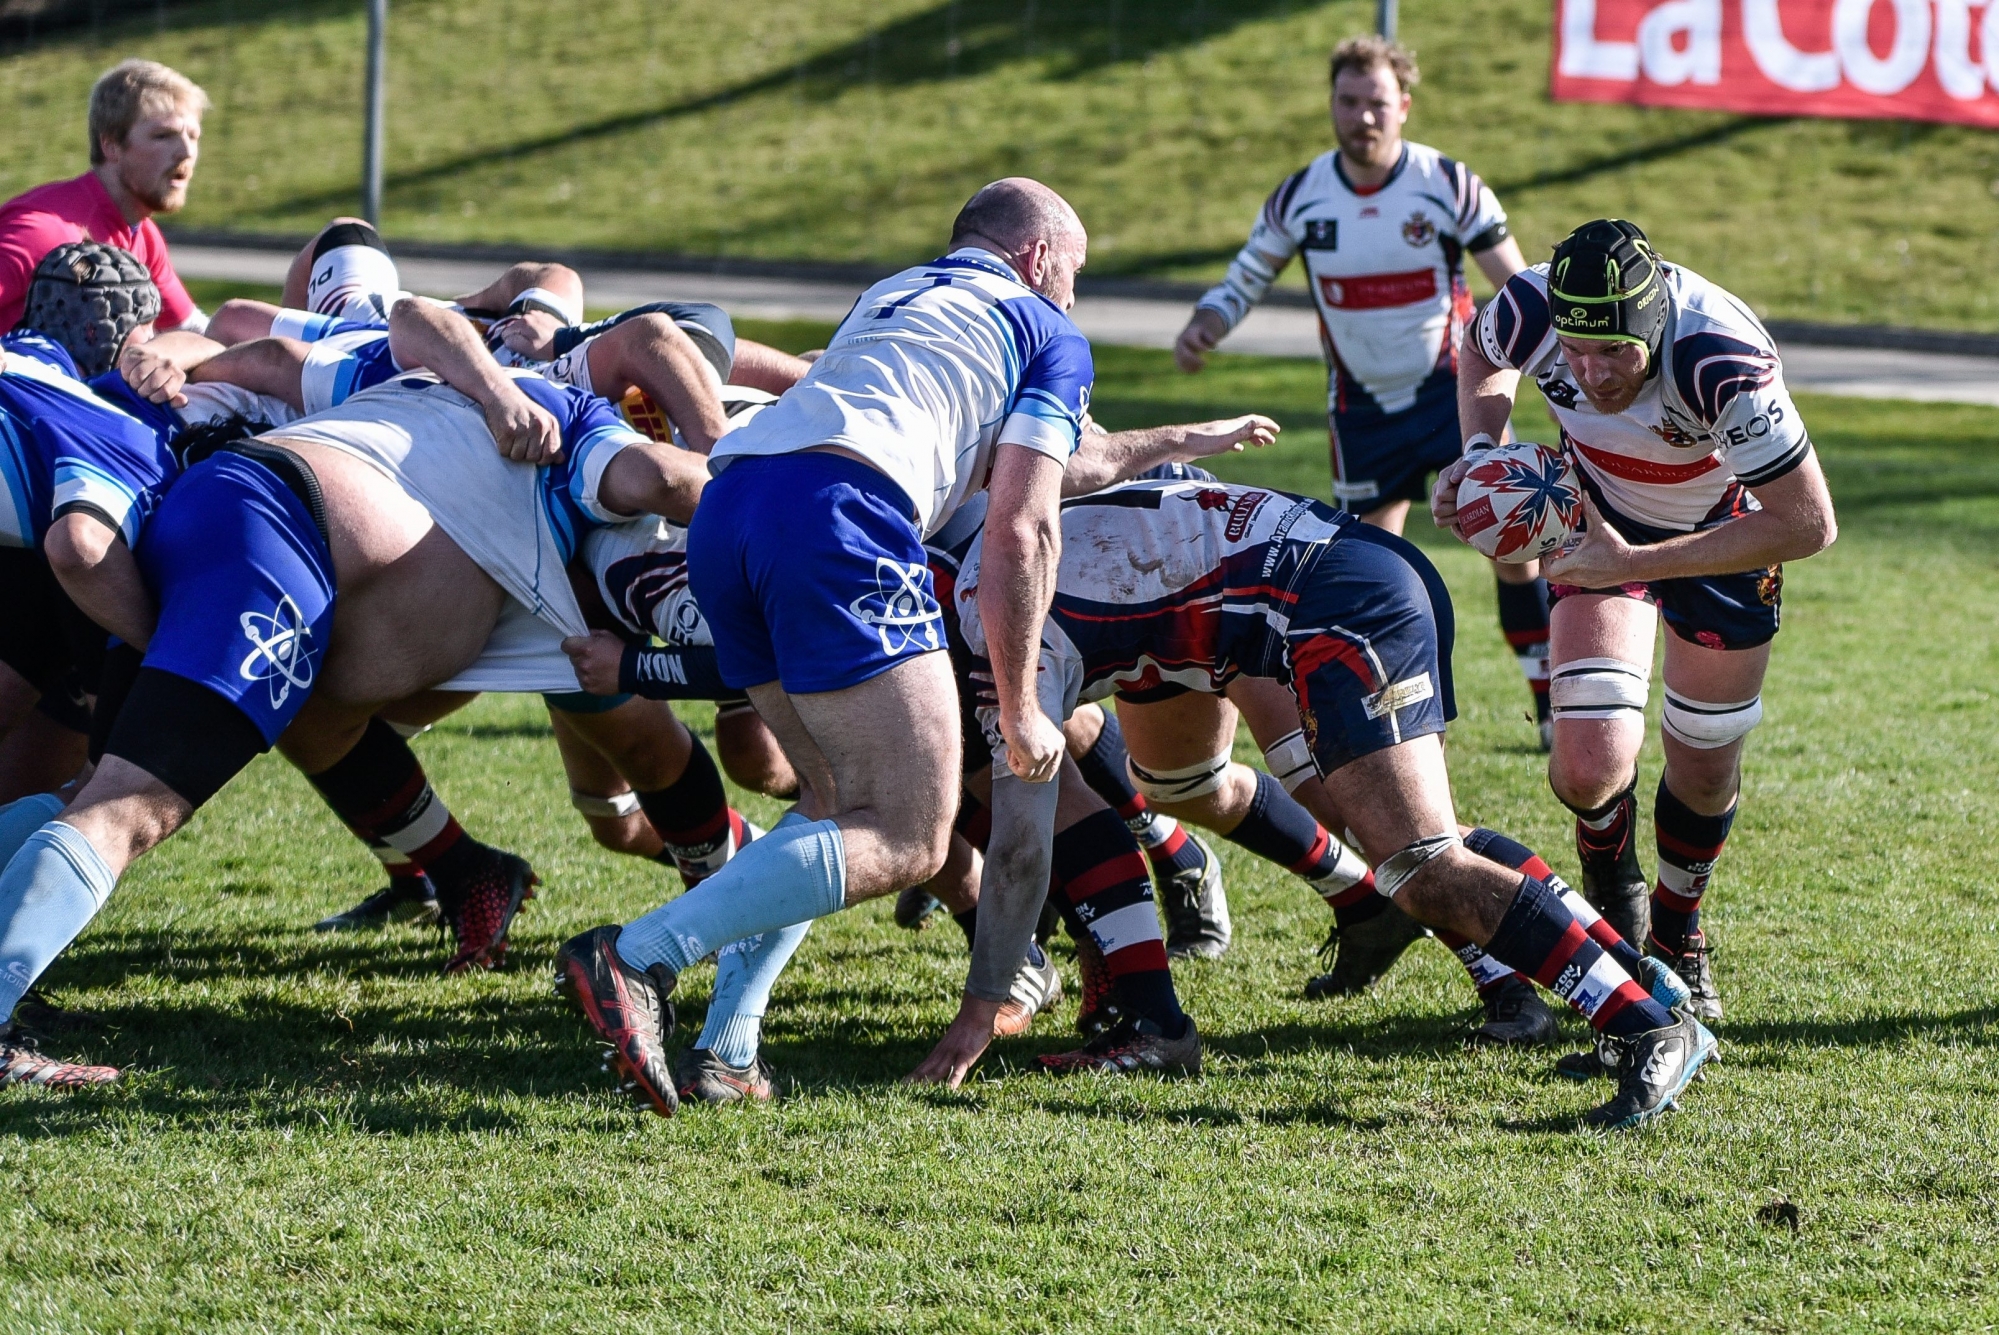 Nyon, dimanche 19 mars 2017, Collovray, Rugby, Ligue nationale A, RC Nyon vs CERN, Lauwrence Wilson, photos Cédric Sandoz